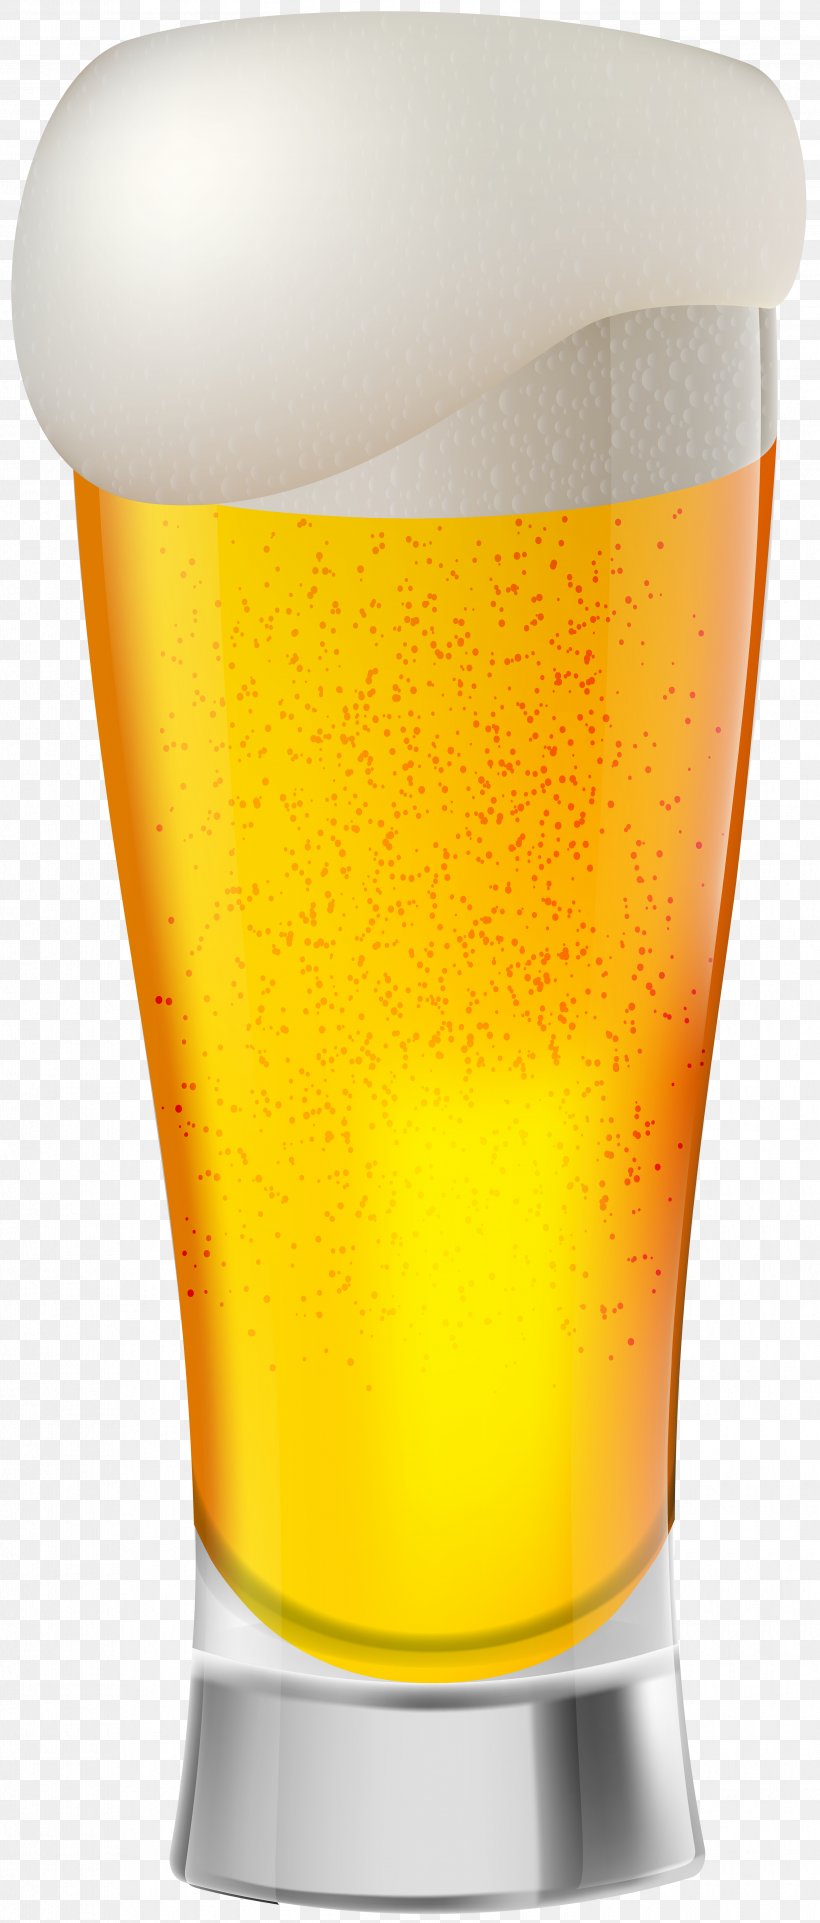 Beer Glasses Clip Art Imperial Pint, PNG, 3410x8000px, Beer, Alcoholic Beverages, Beer Glass, Beer Glasses, Champagne Glass Download Free